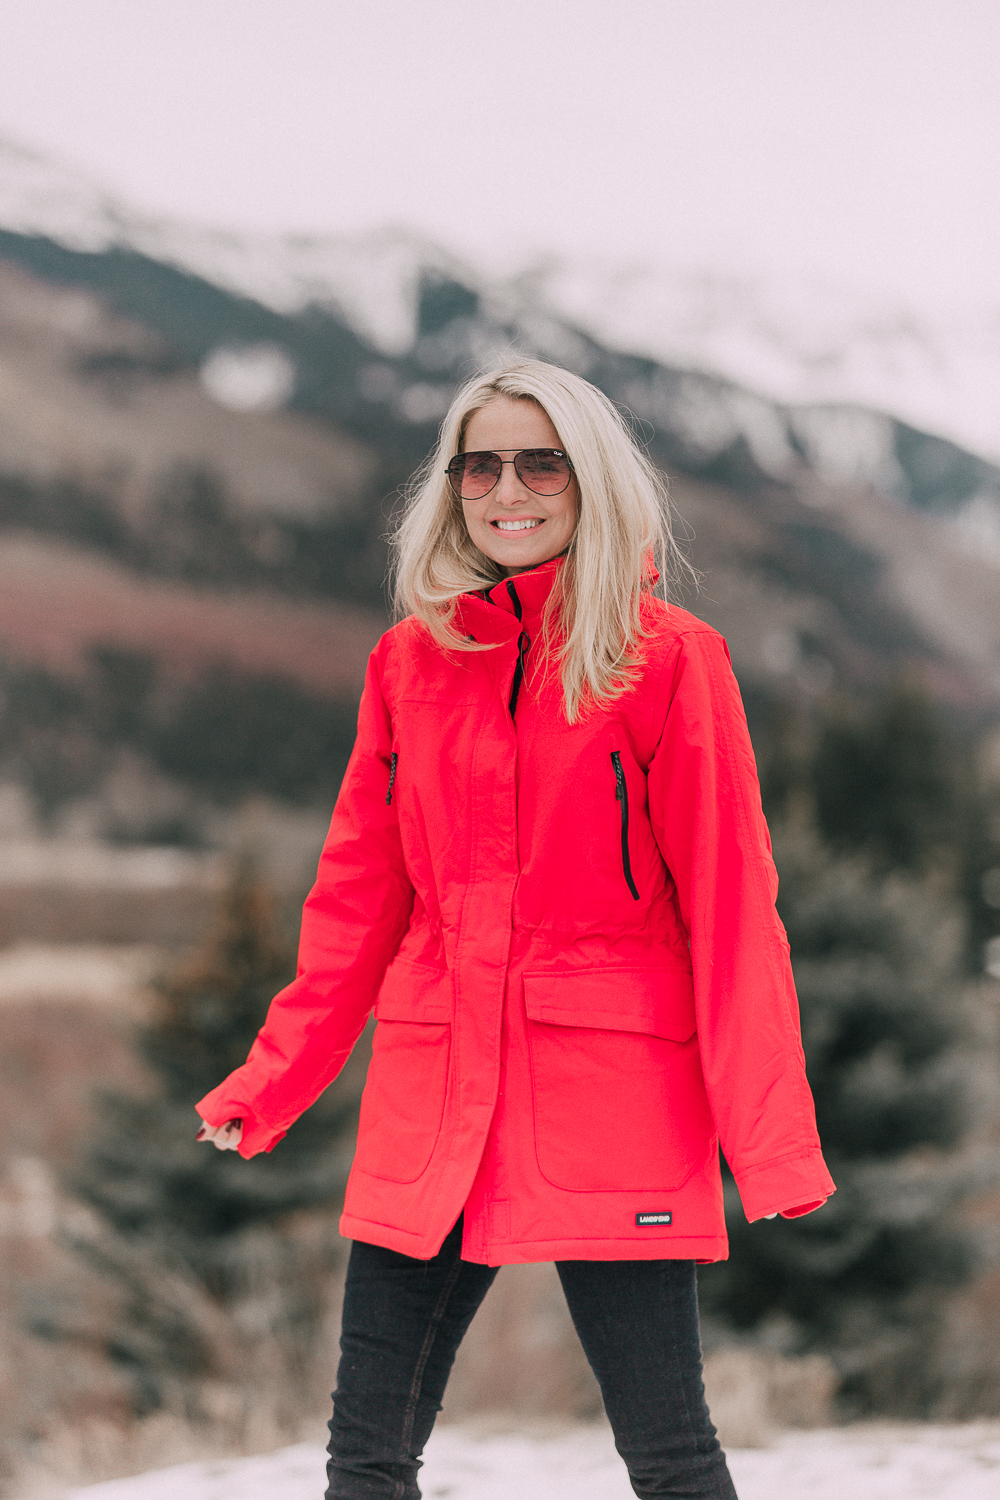 Lands End parka for snow in red in the mountains of colorado